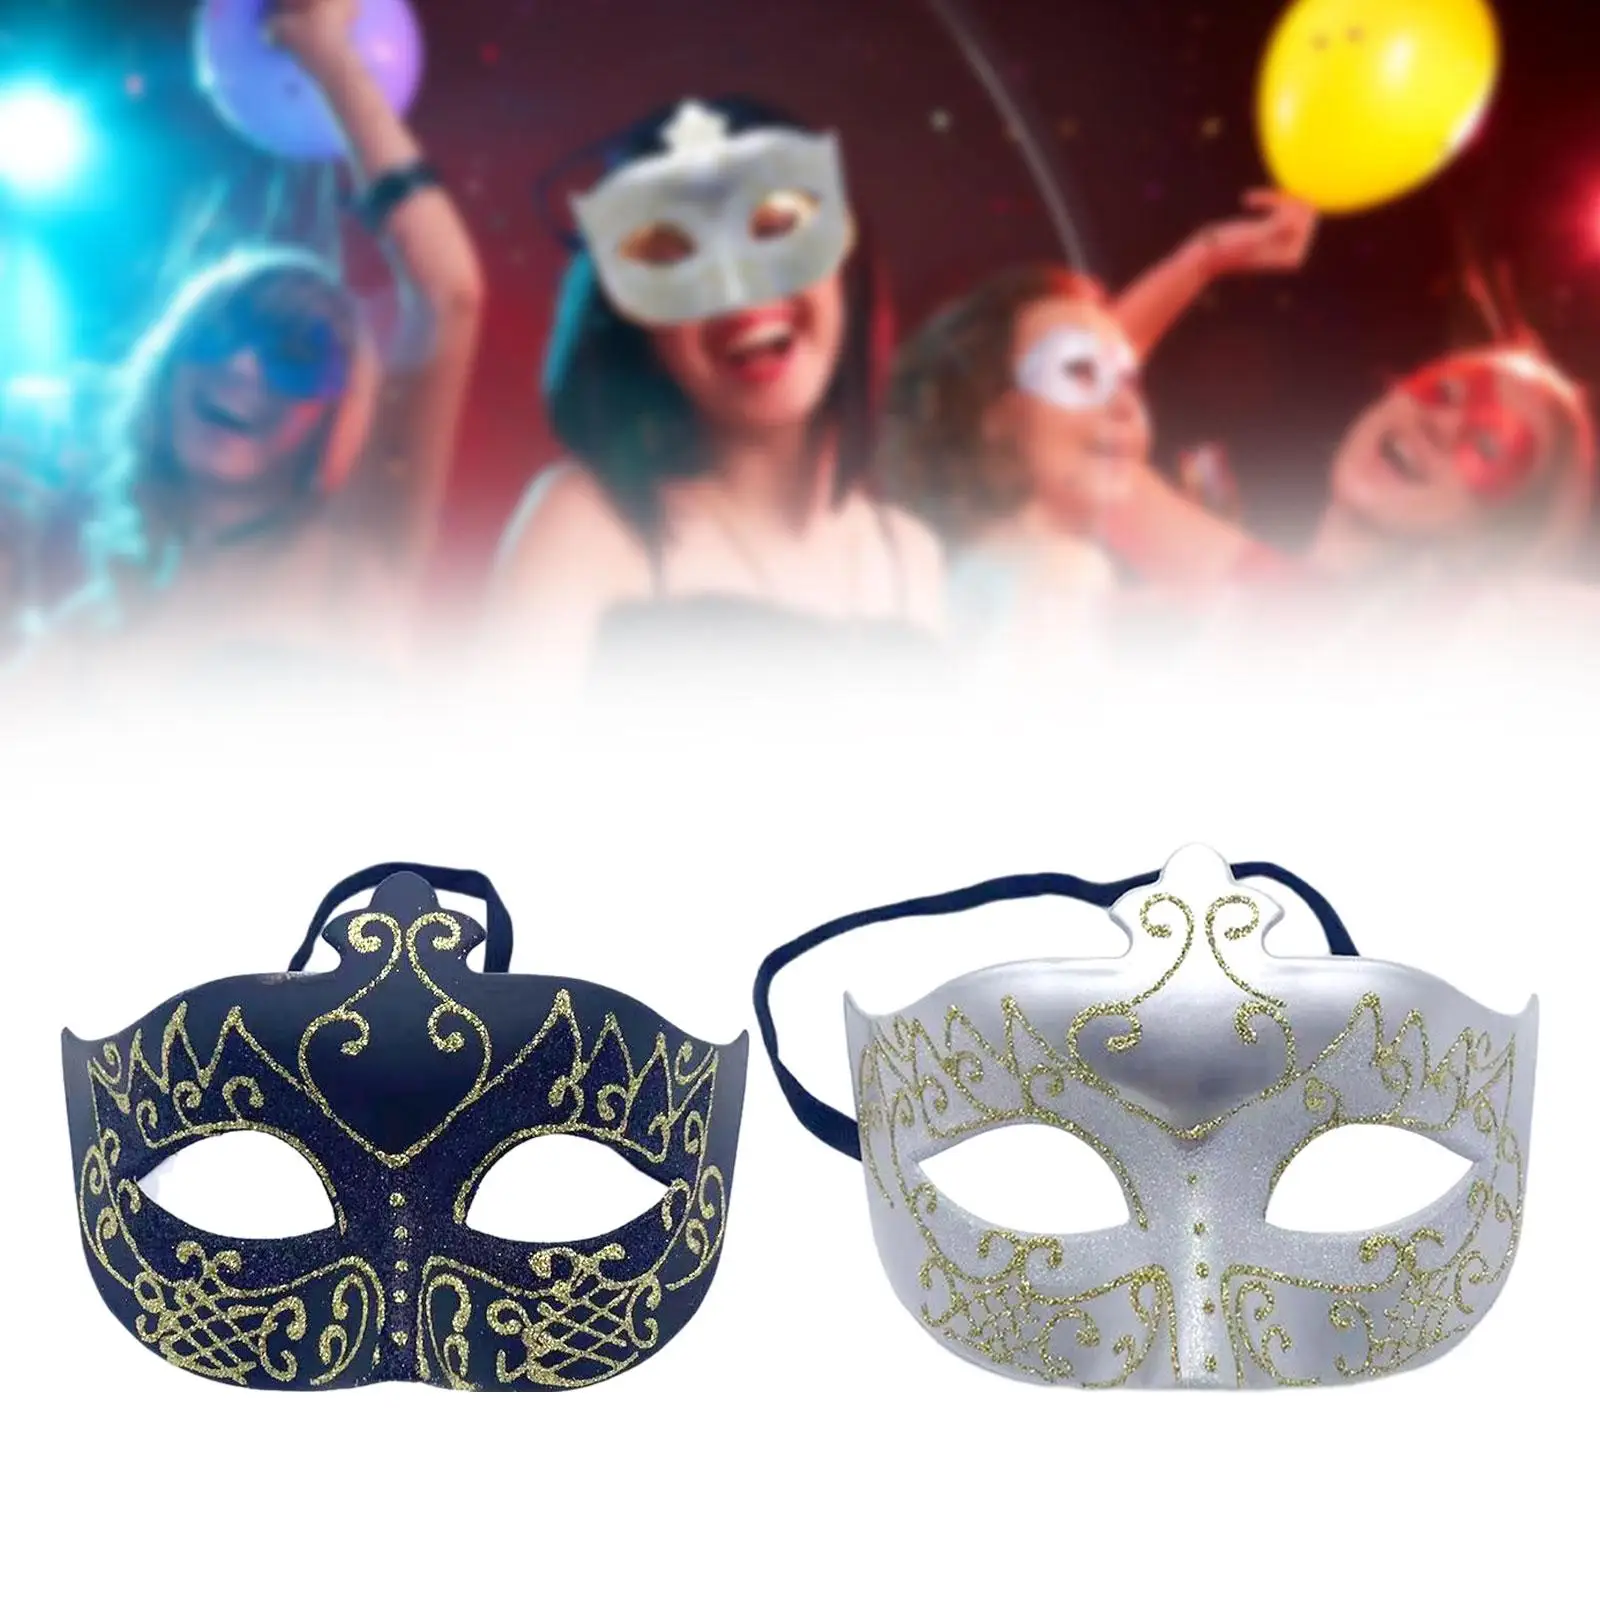 Masquerade Mask Cosplay Costume Accessories Face Cover Prom Mask Props for Club Carnival Festival Party Favor Fancy Dress